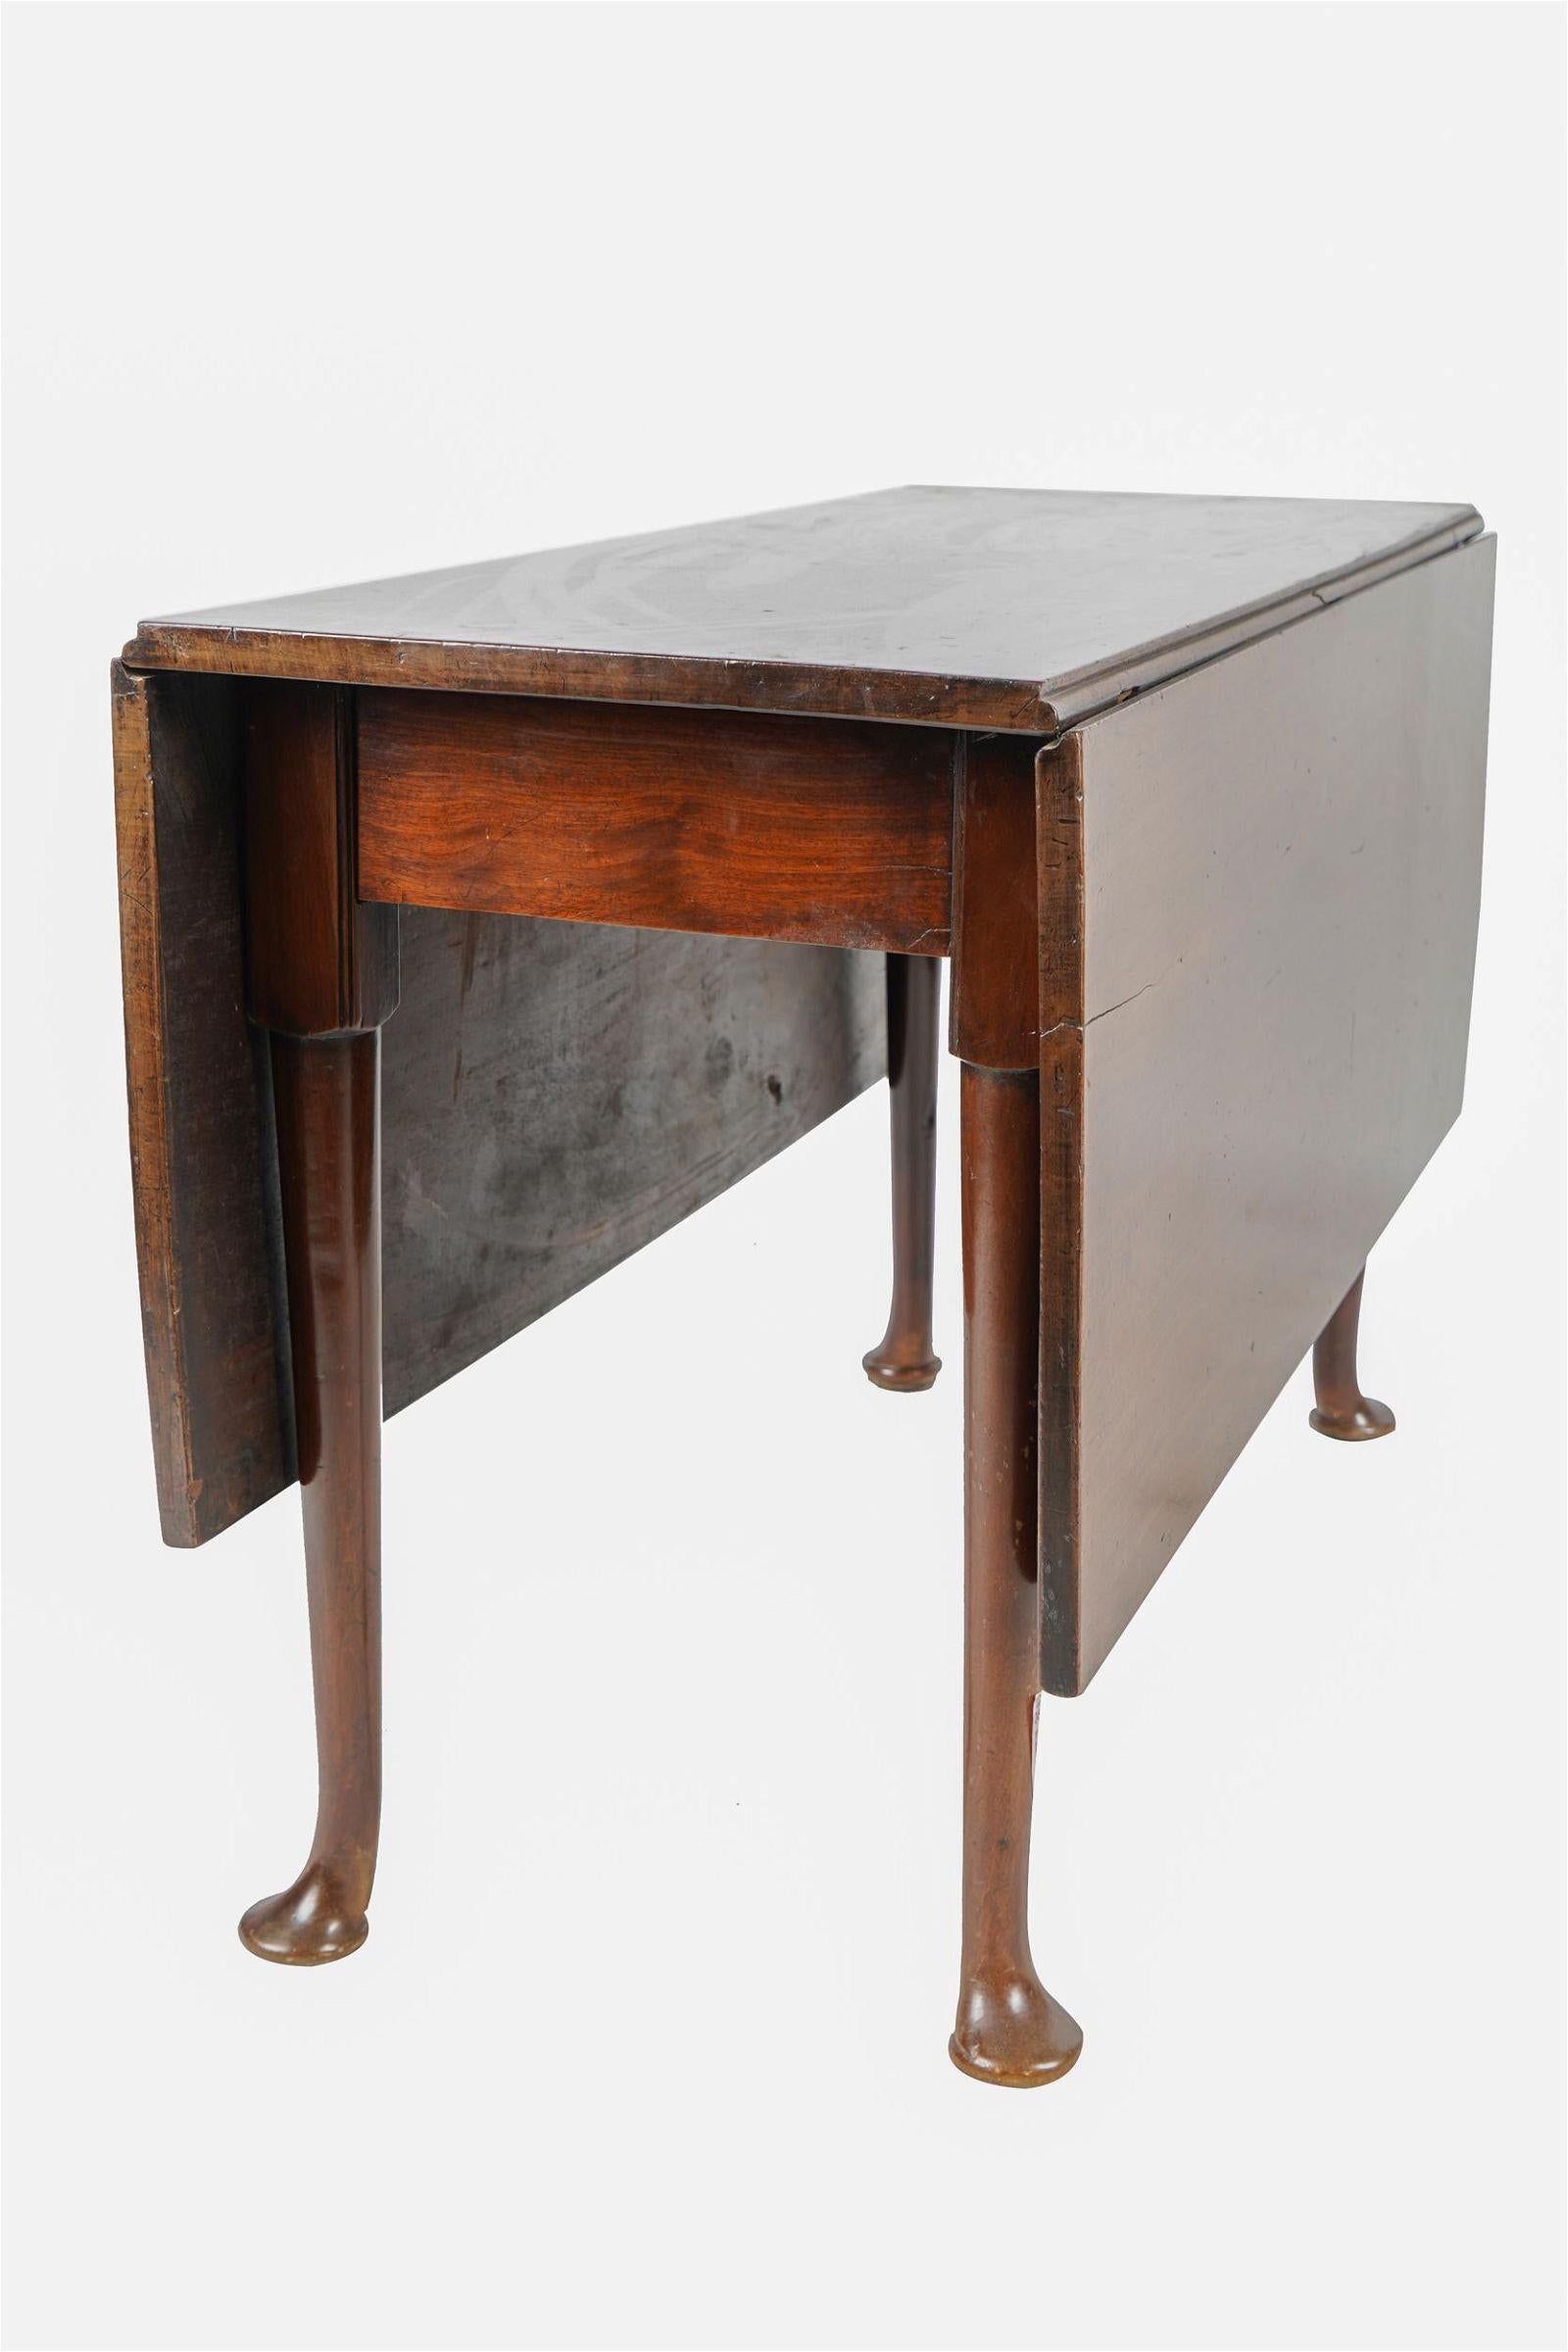 Late 18th Century English Queen Anne Style Mahogany Drop Leaf Table - the hinged top opening to rest on gate legs - 17 inches wide (closed); 51 1/2 inches wide (fully extended); 44 1/4 inches deep; 27 1/2 inches high